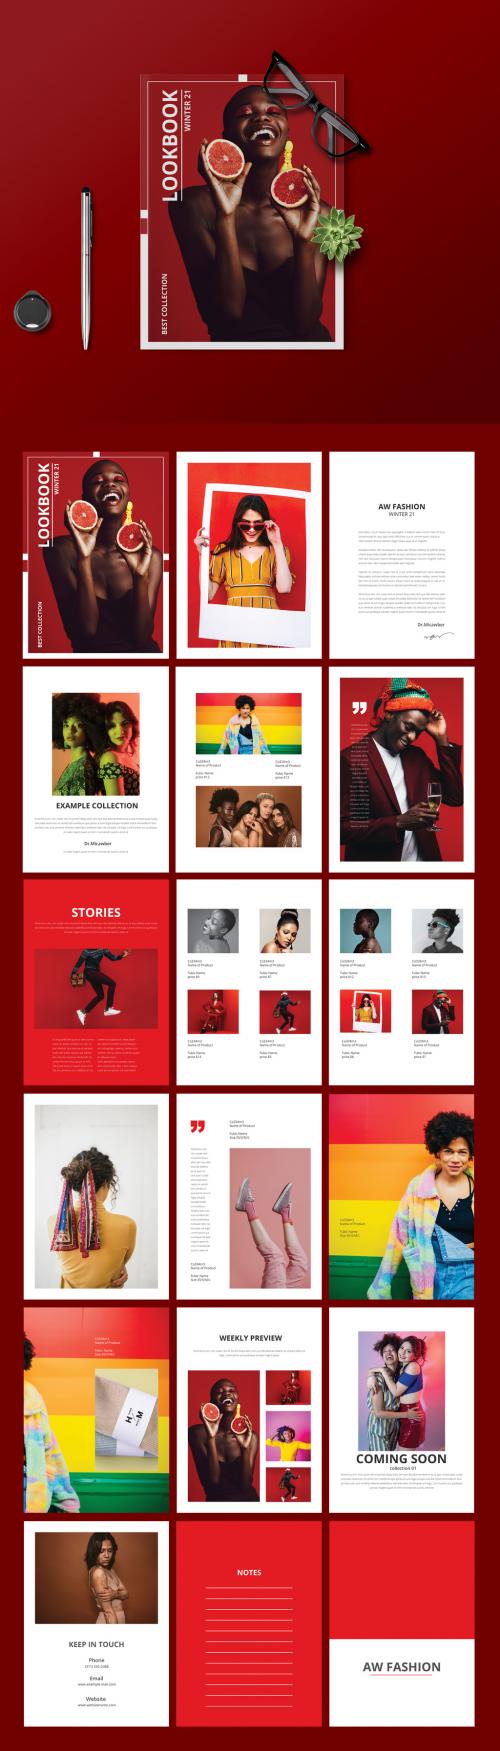 Lookbook Layout with Red Accents - 394759109